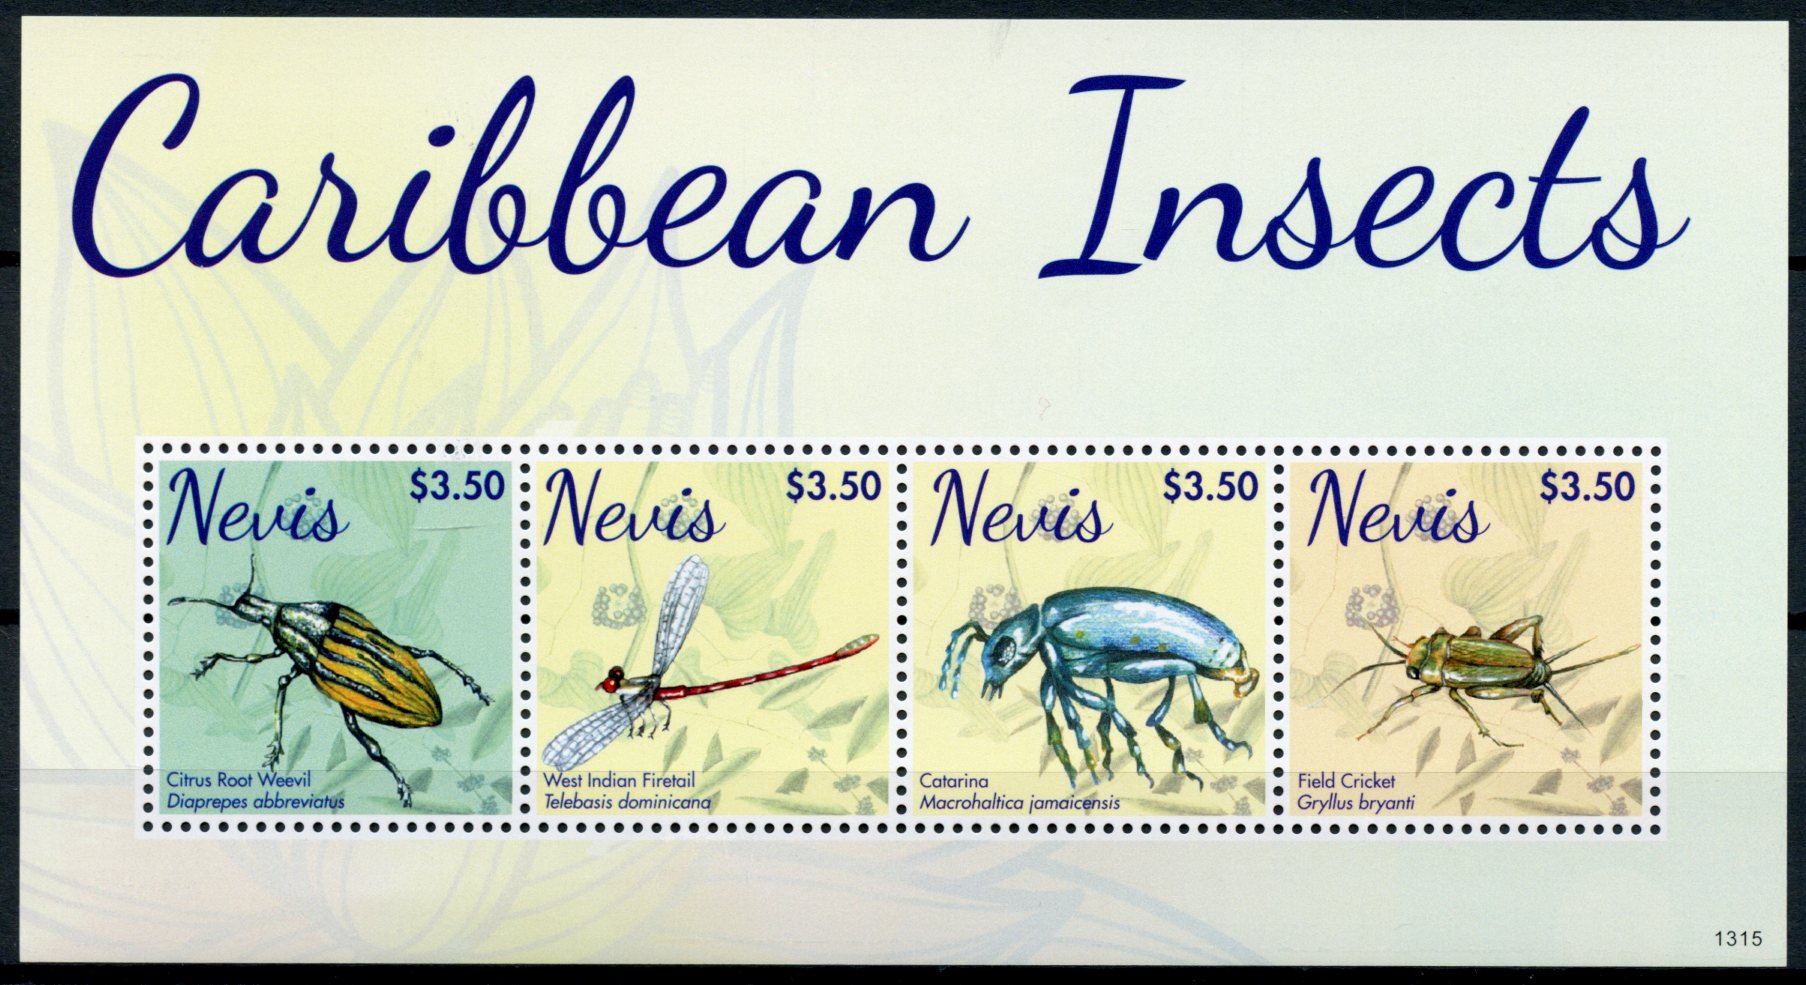 Nevis 2013 MNH Caribbean Insects Stamps Weevil Crickets Beetles 4v M/S